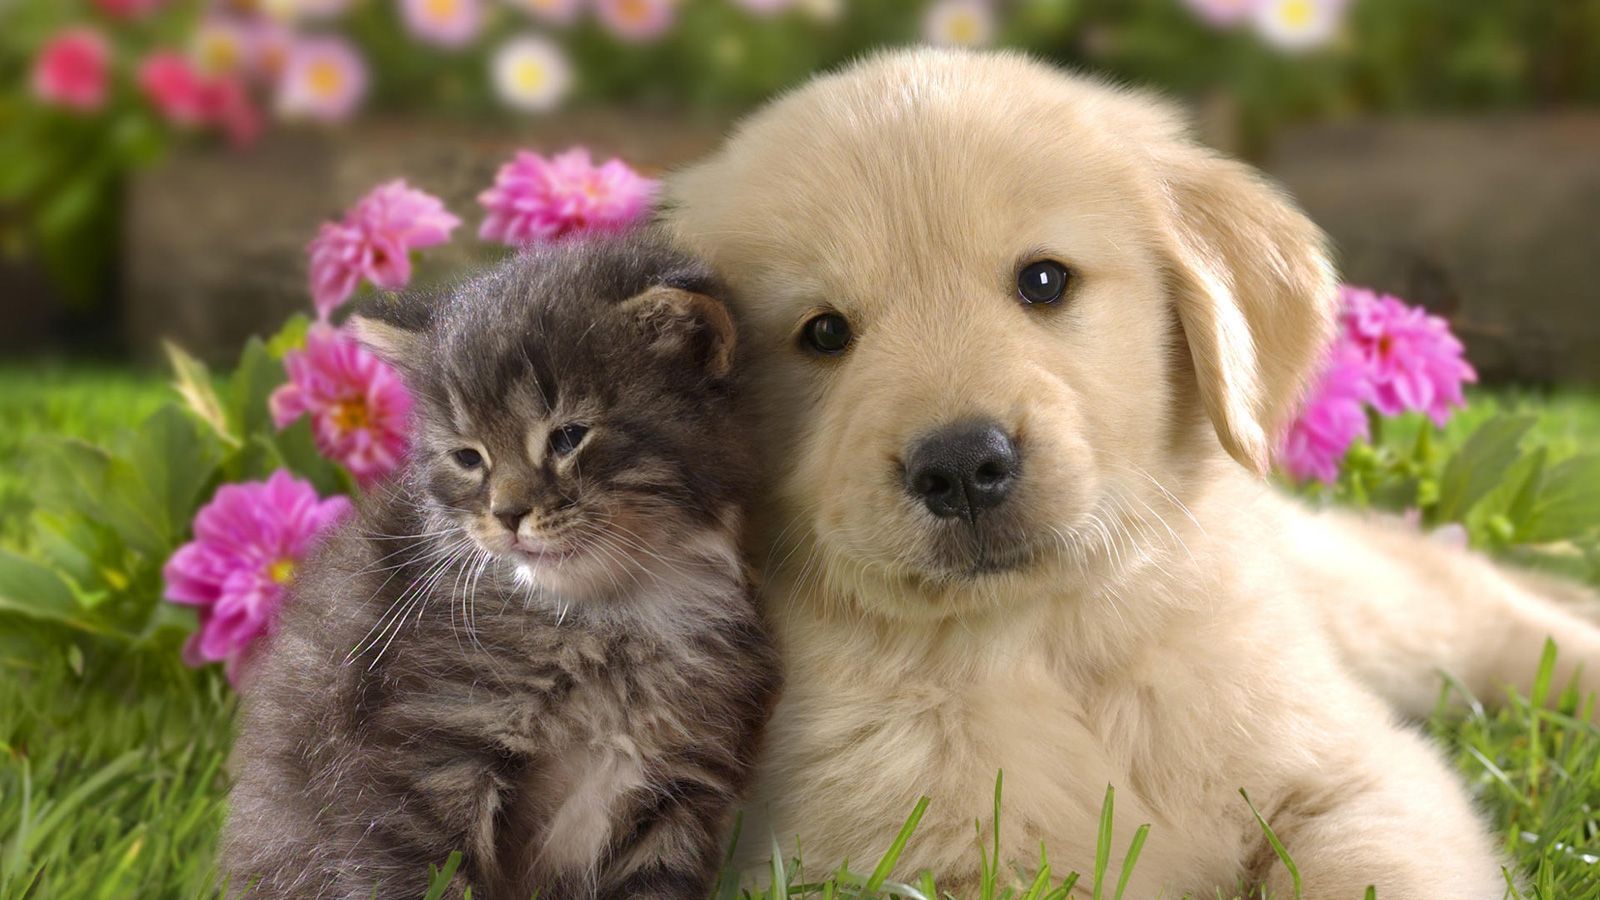 45+] Adorable Cat and Dog Wallpapers